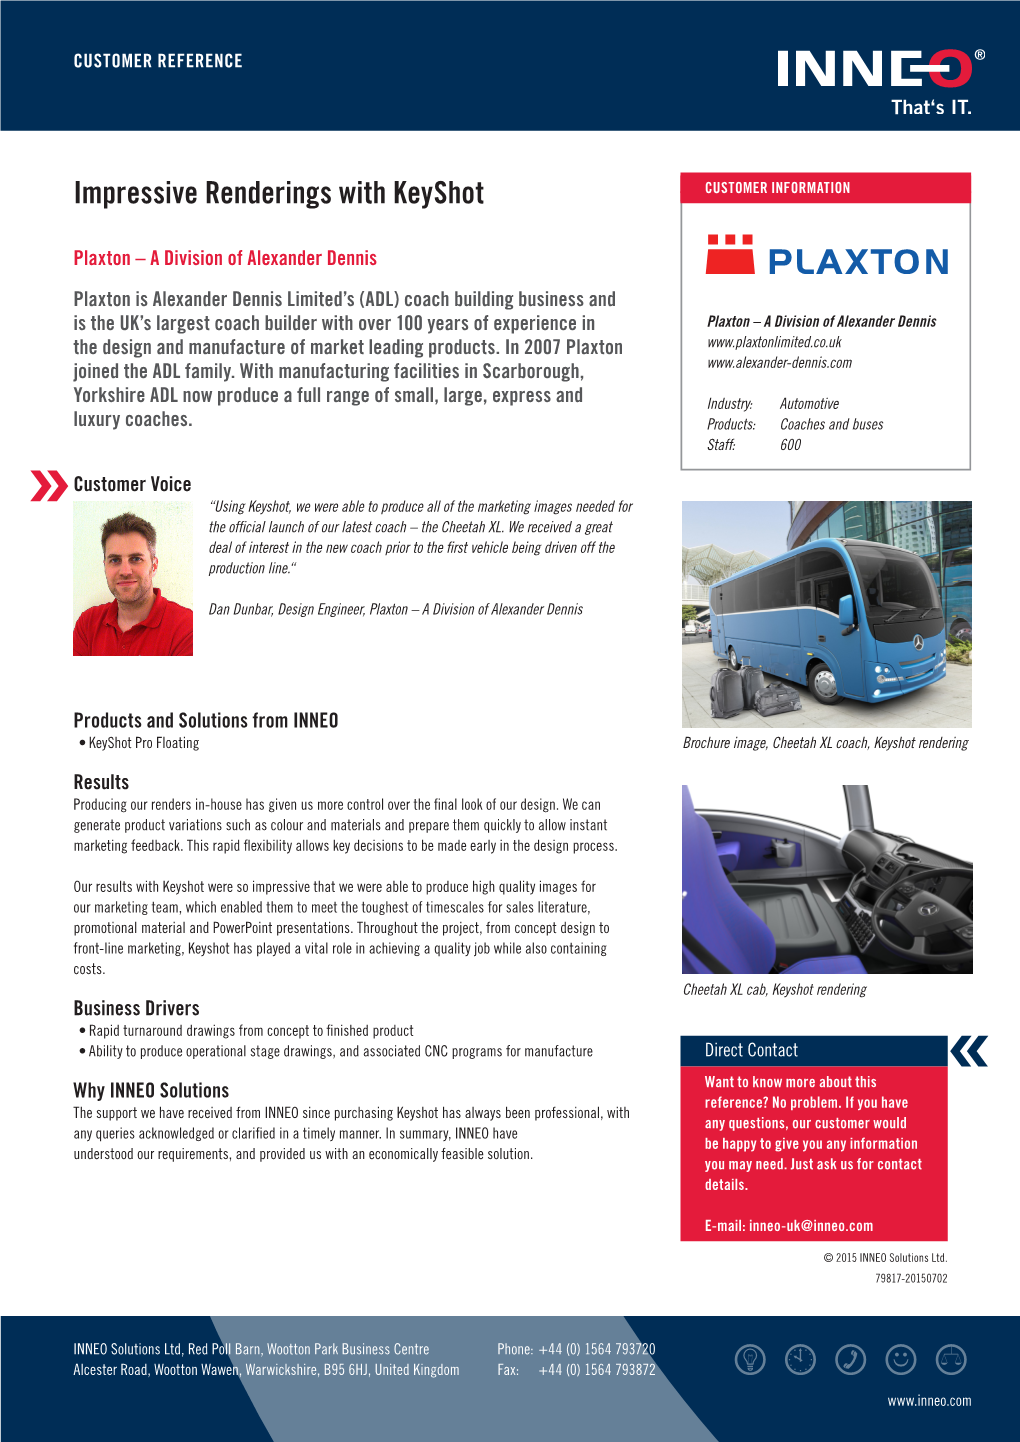 Customer Reference Plaxton – a Division of Alexander Dennis